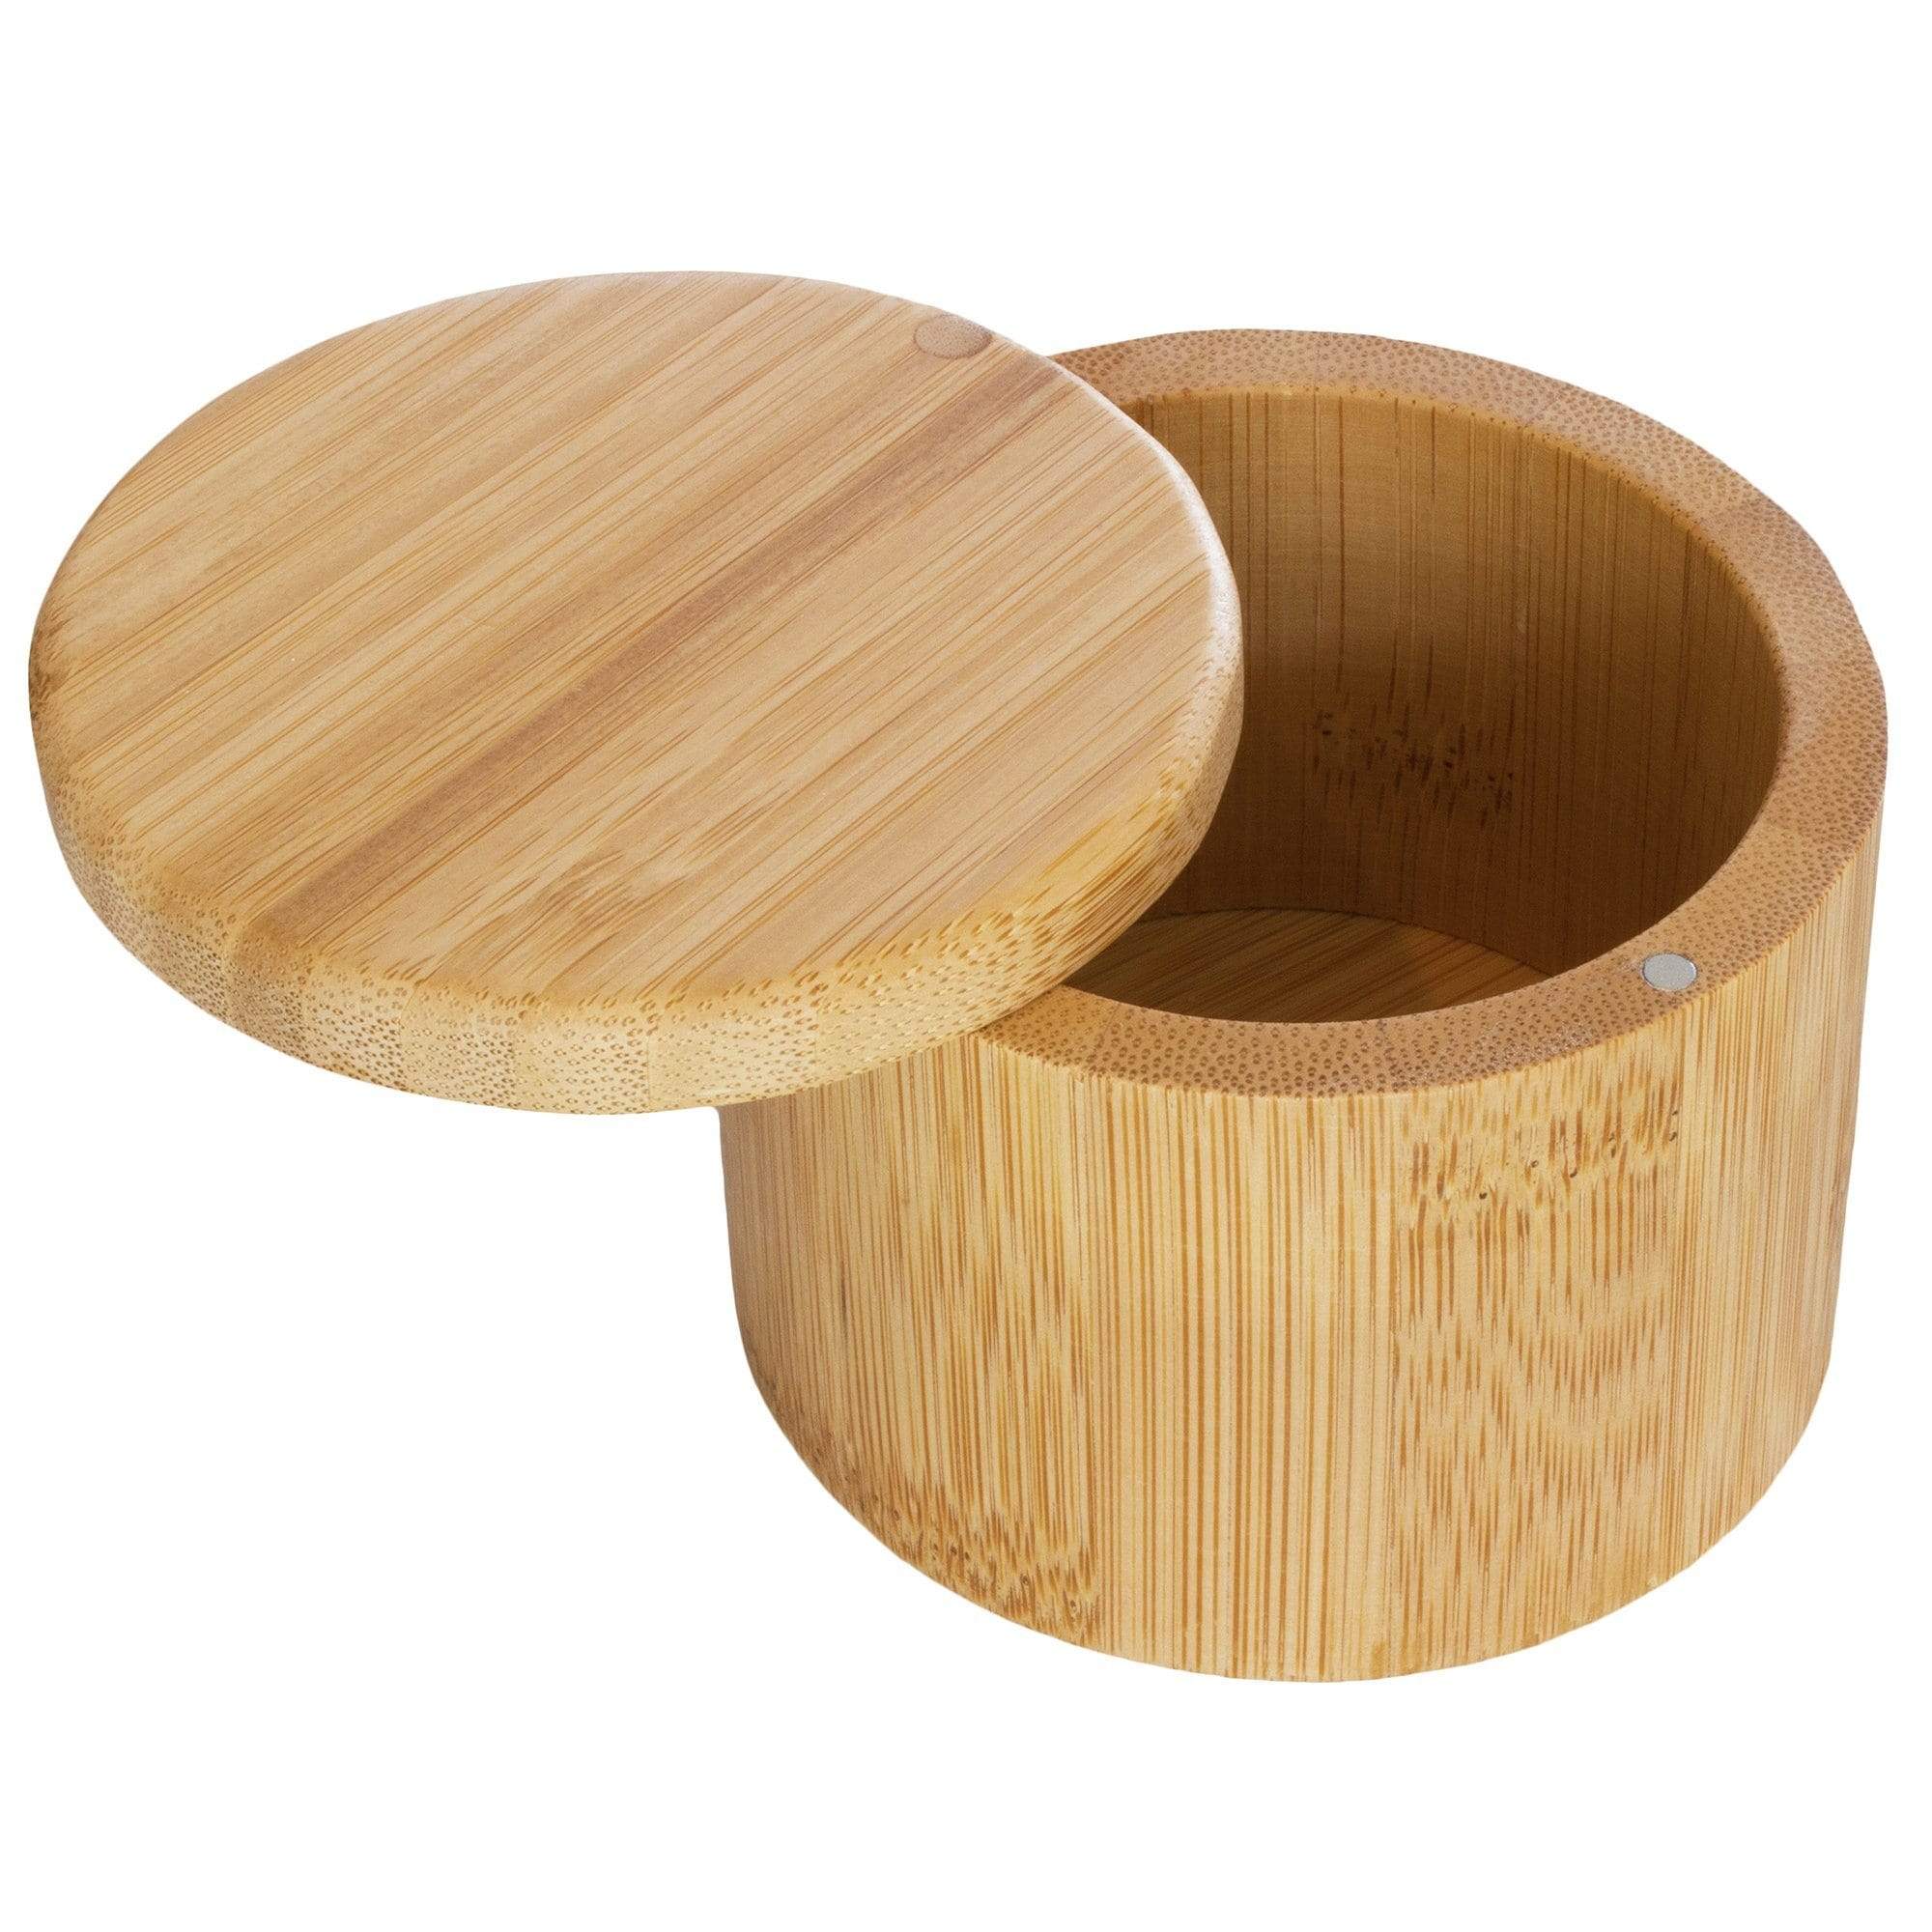 https://totallybamboo.com/cdn/shop/products/salt-box-with-magnetic-swivel-lid-6-oz-capacity-totally-bamboo-130498.jpg?v=1628015292